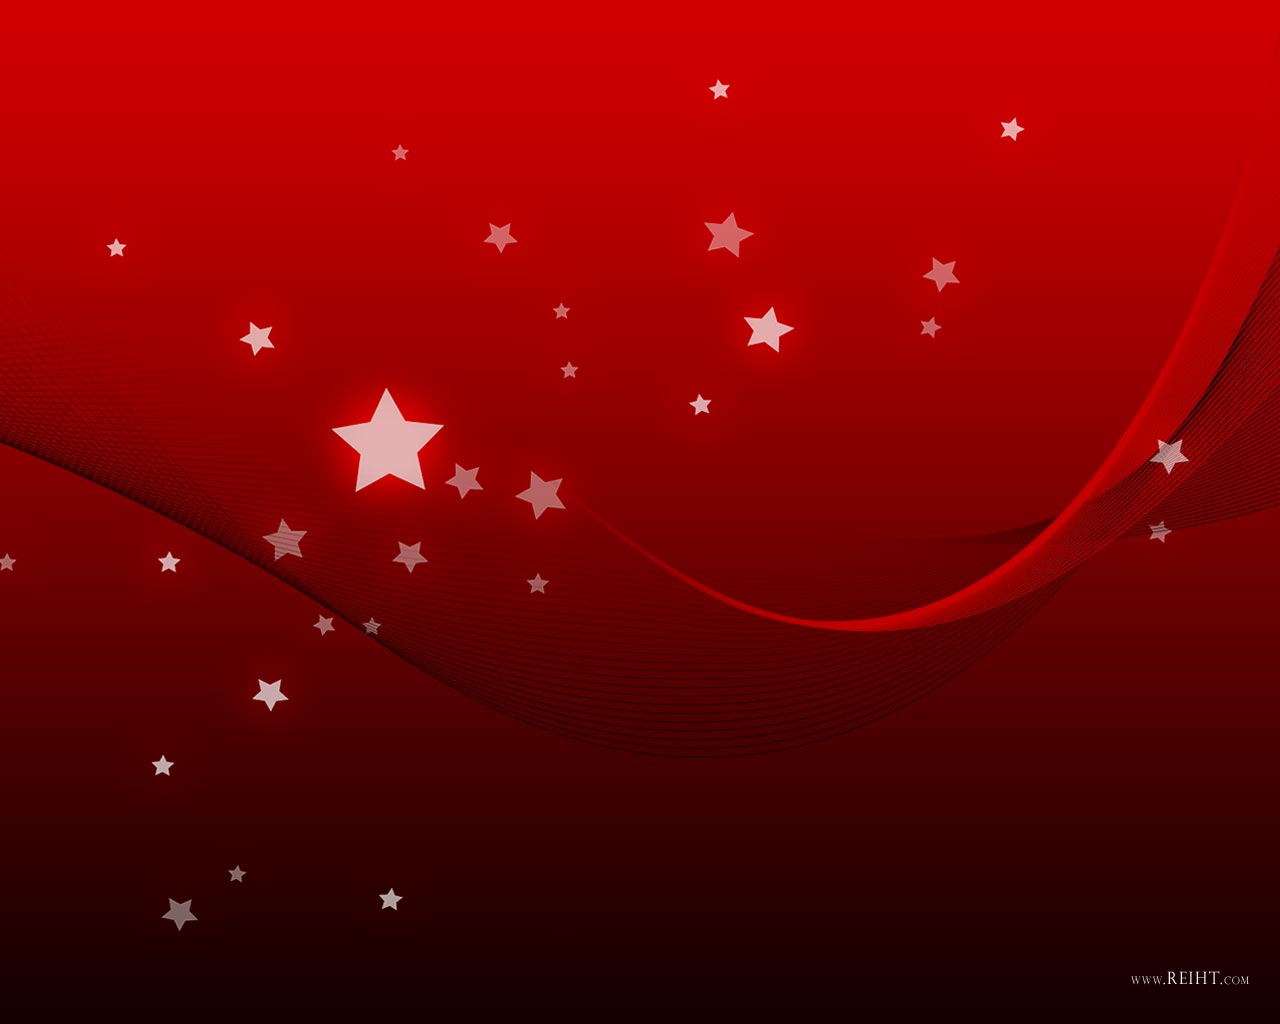 Red And Star Wallpaper - Hd Background Red Colour - 1280x1024 Wallpaper -  